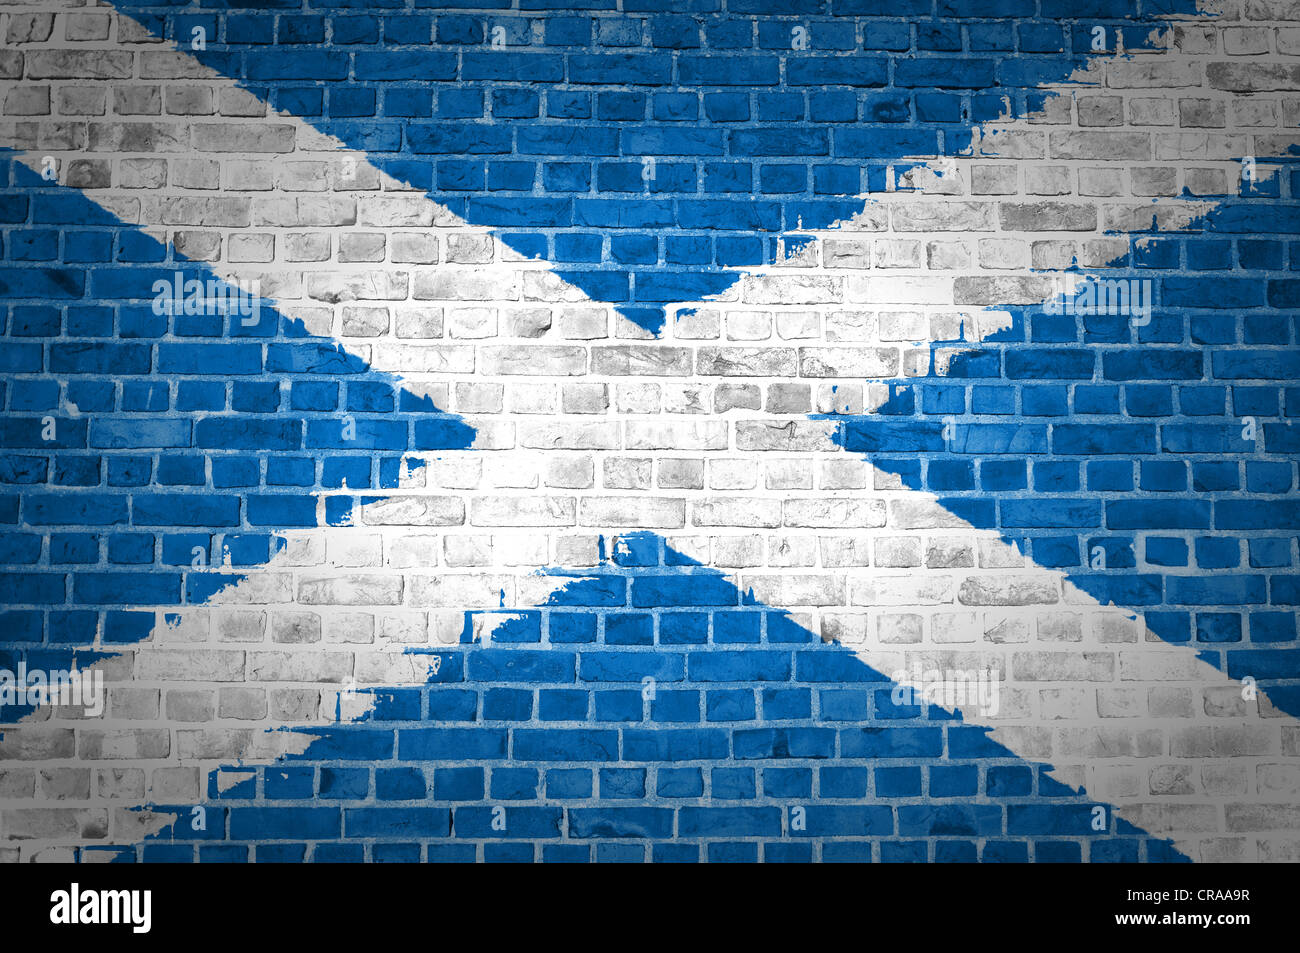 An image of the Scotland Saltire flag painted on a brick wall in an urban location Stock Photo